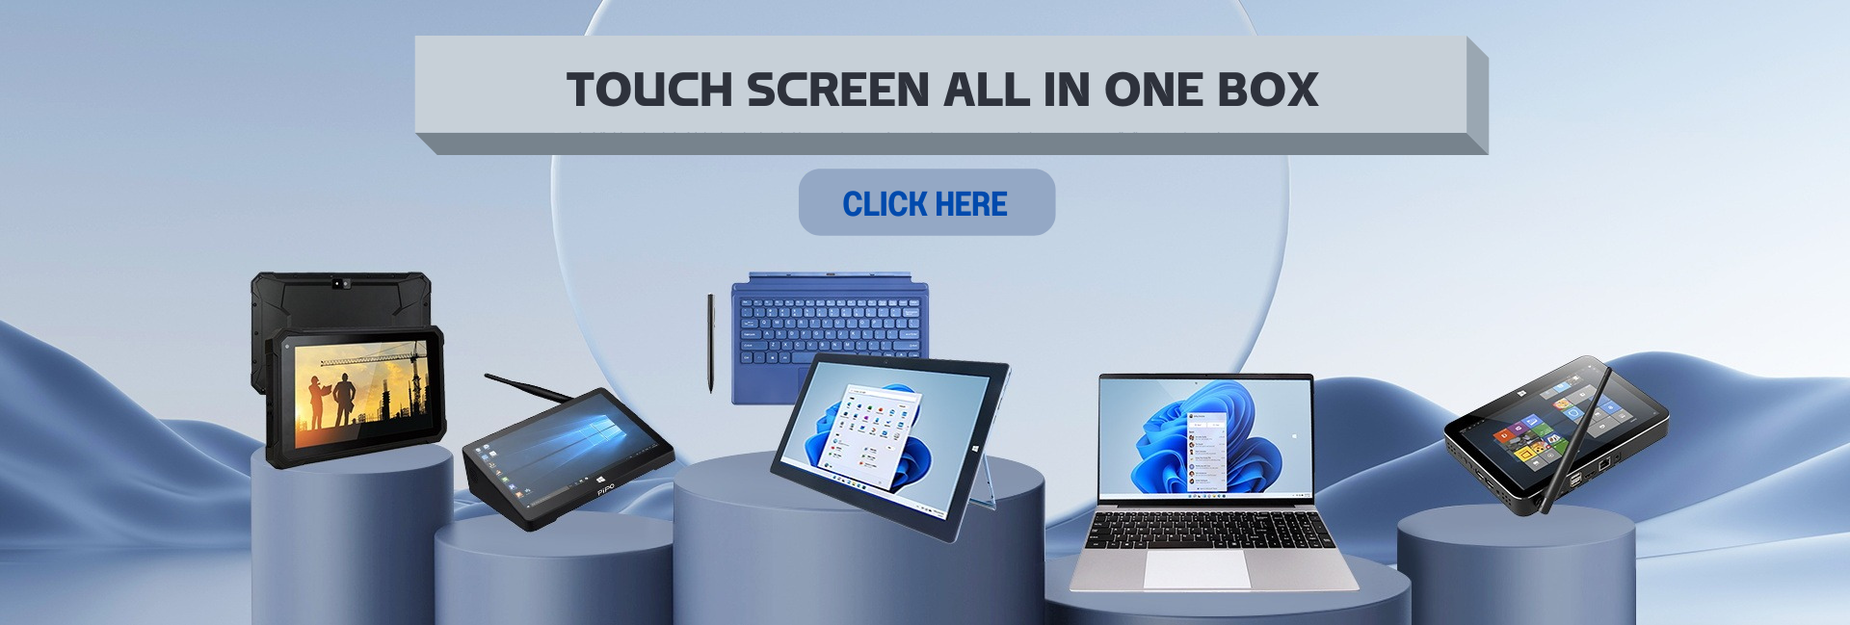 Touch Screen All In One Box